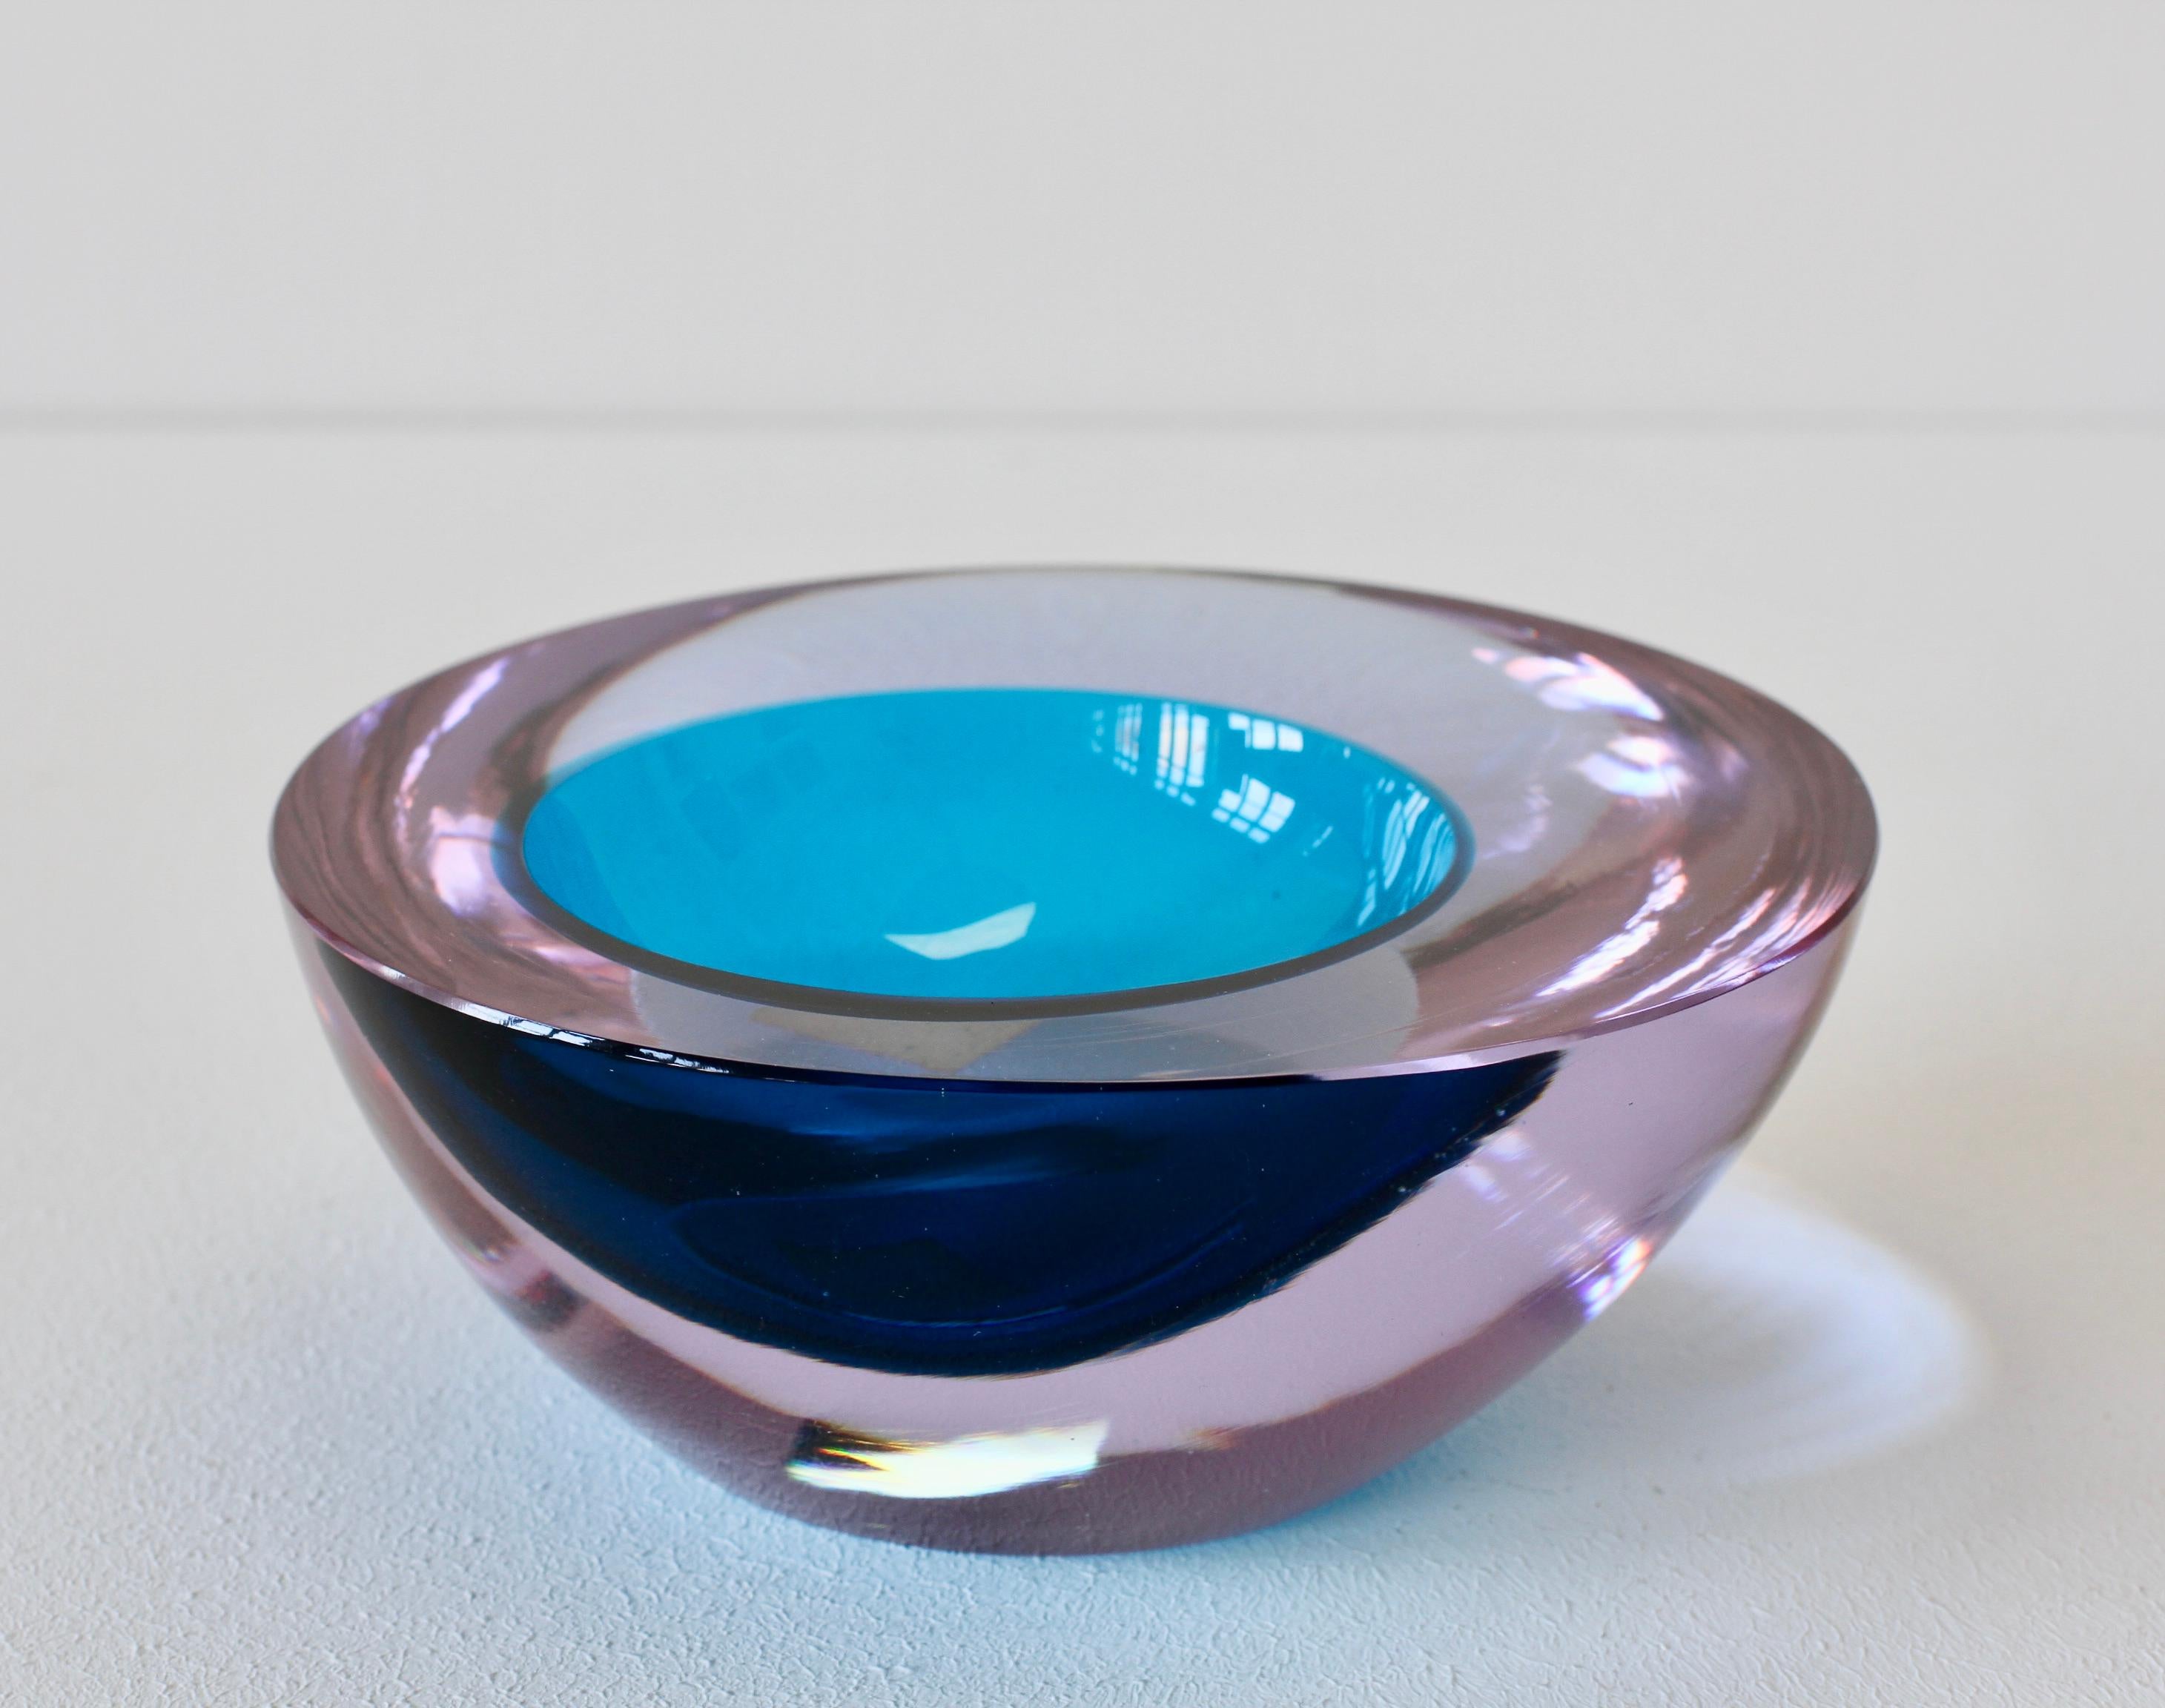 Mid-Century Modern Large Italian Alexandrite and Blue Sommerso Murano Glass Bowl, Dish or Ashtray For Sale